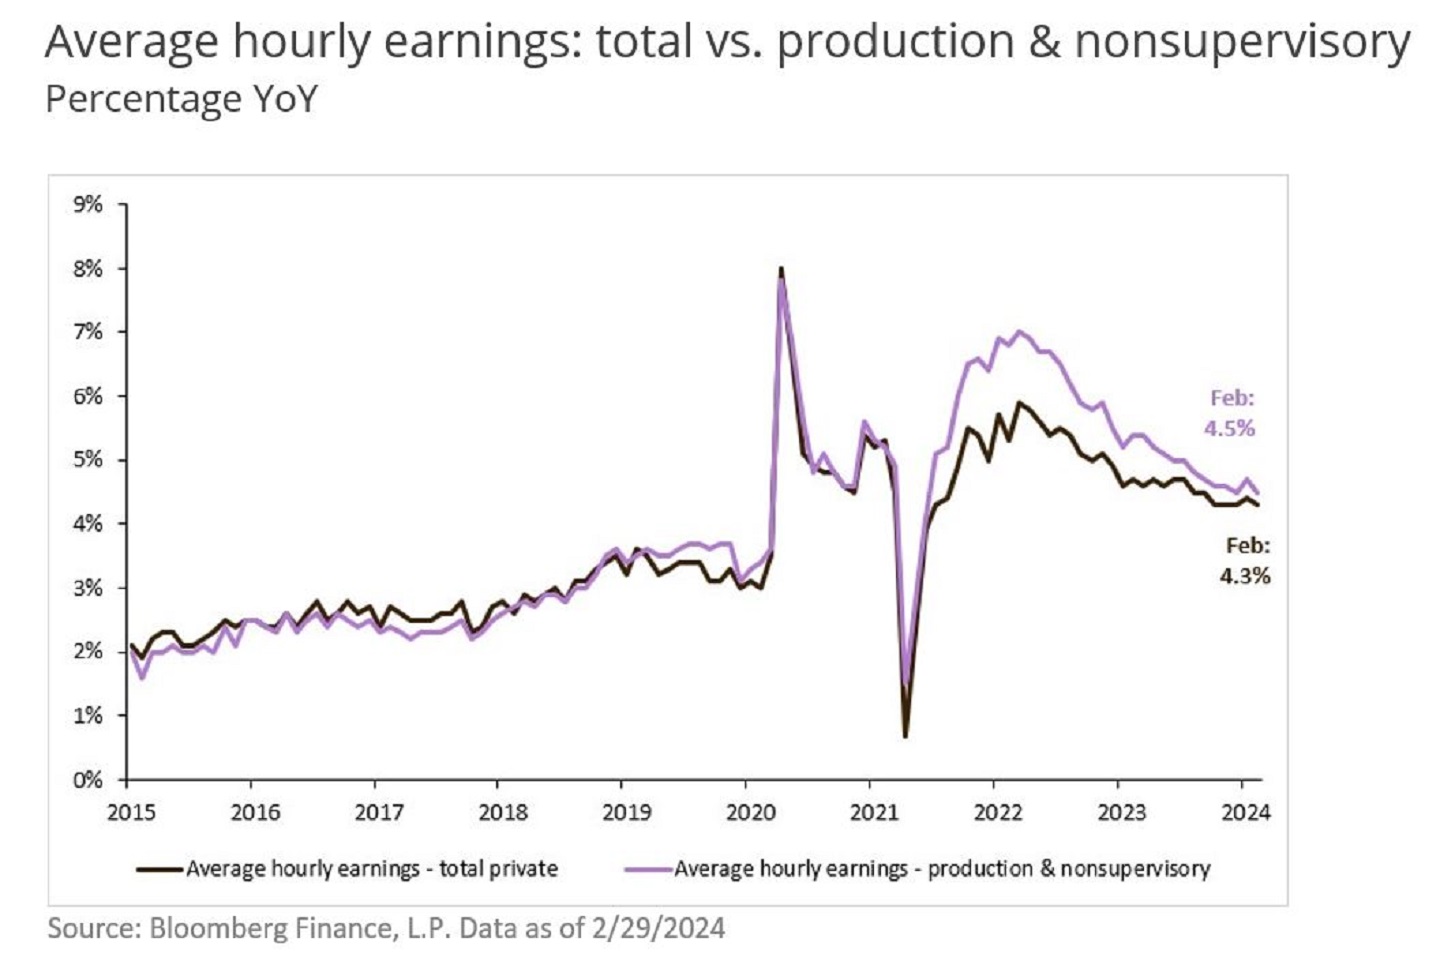 This line graph compares the total average hourly earnings and the average hourly earnings of production and nonsupervisory between 2015 and Feb 2024. 